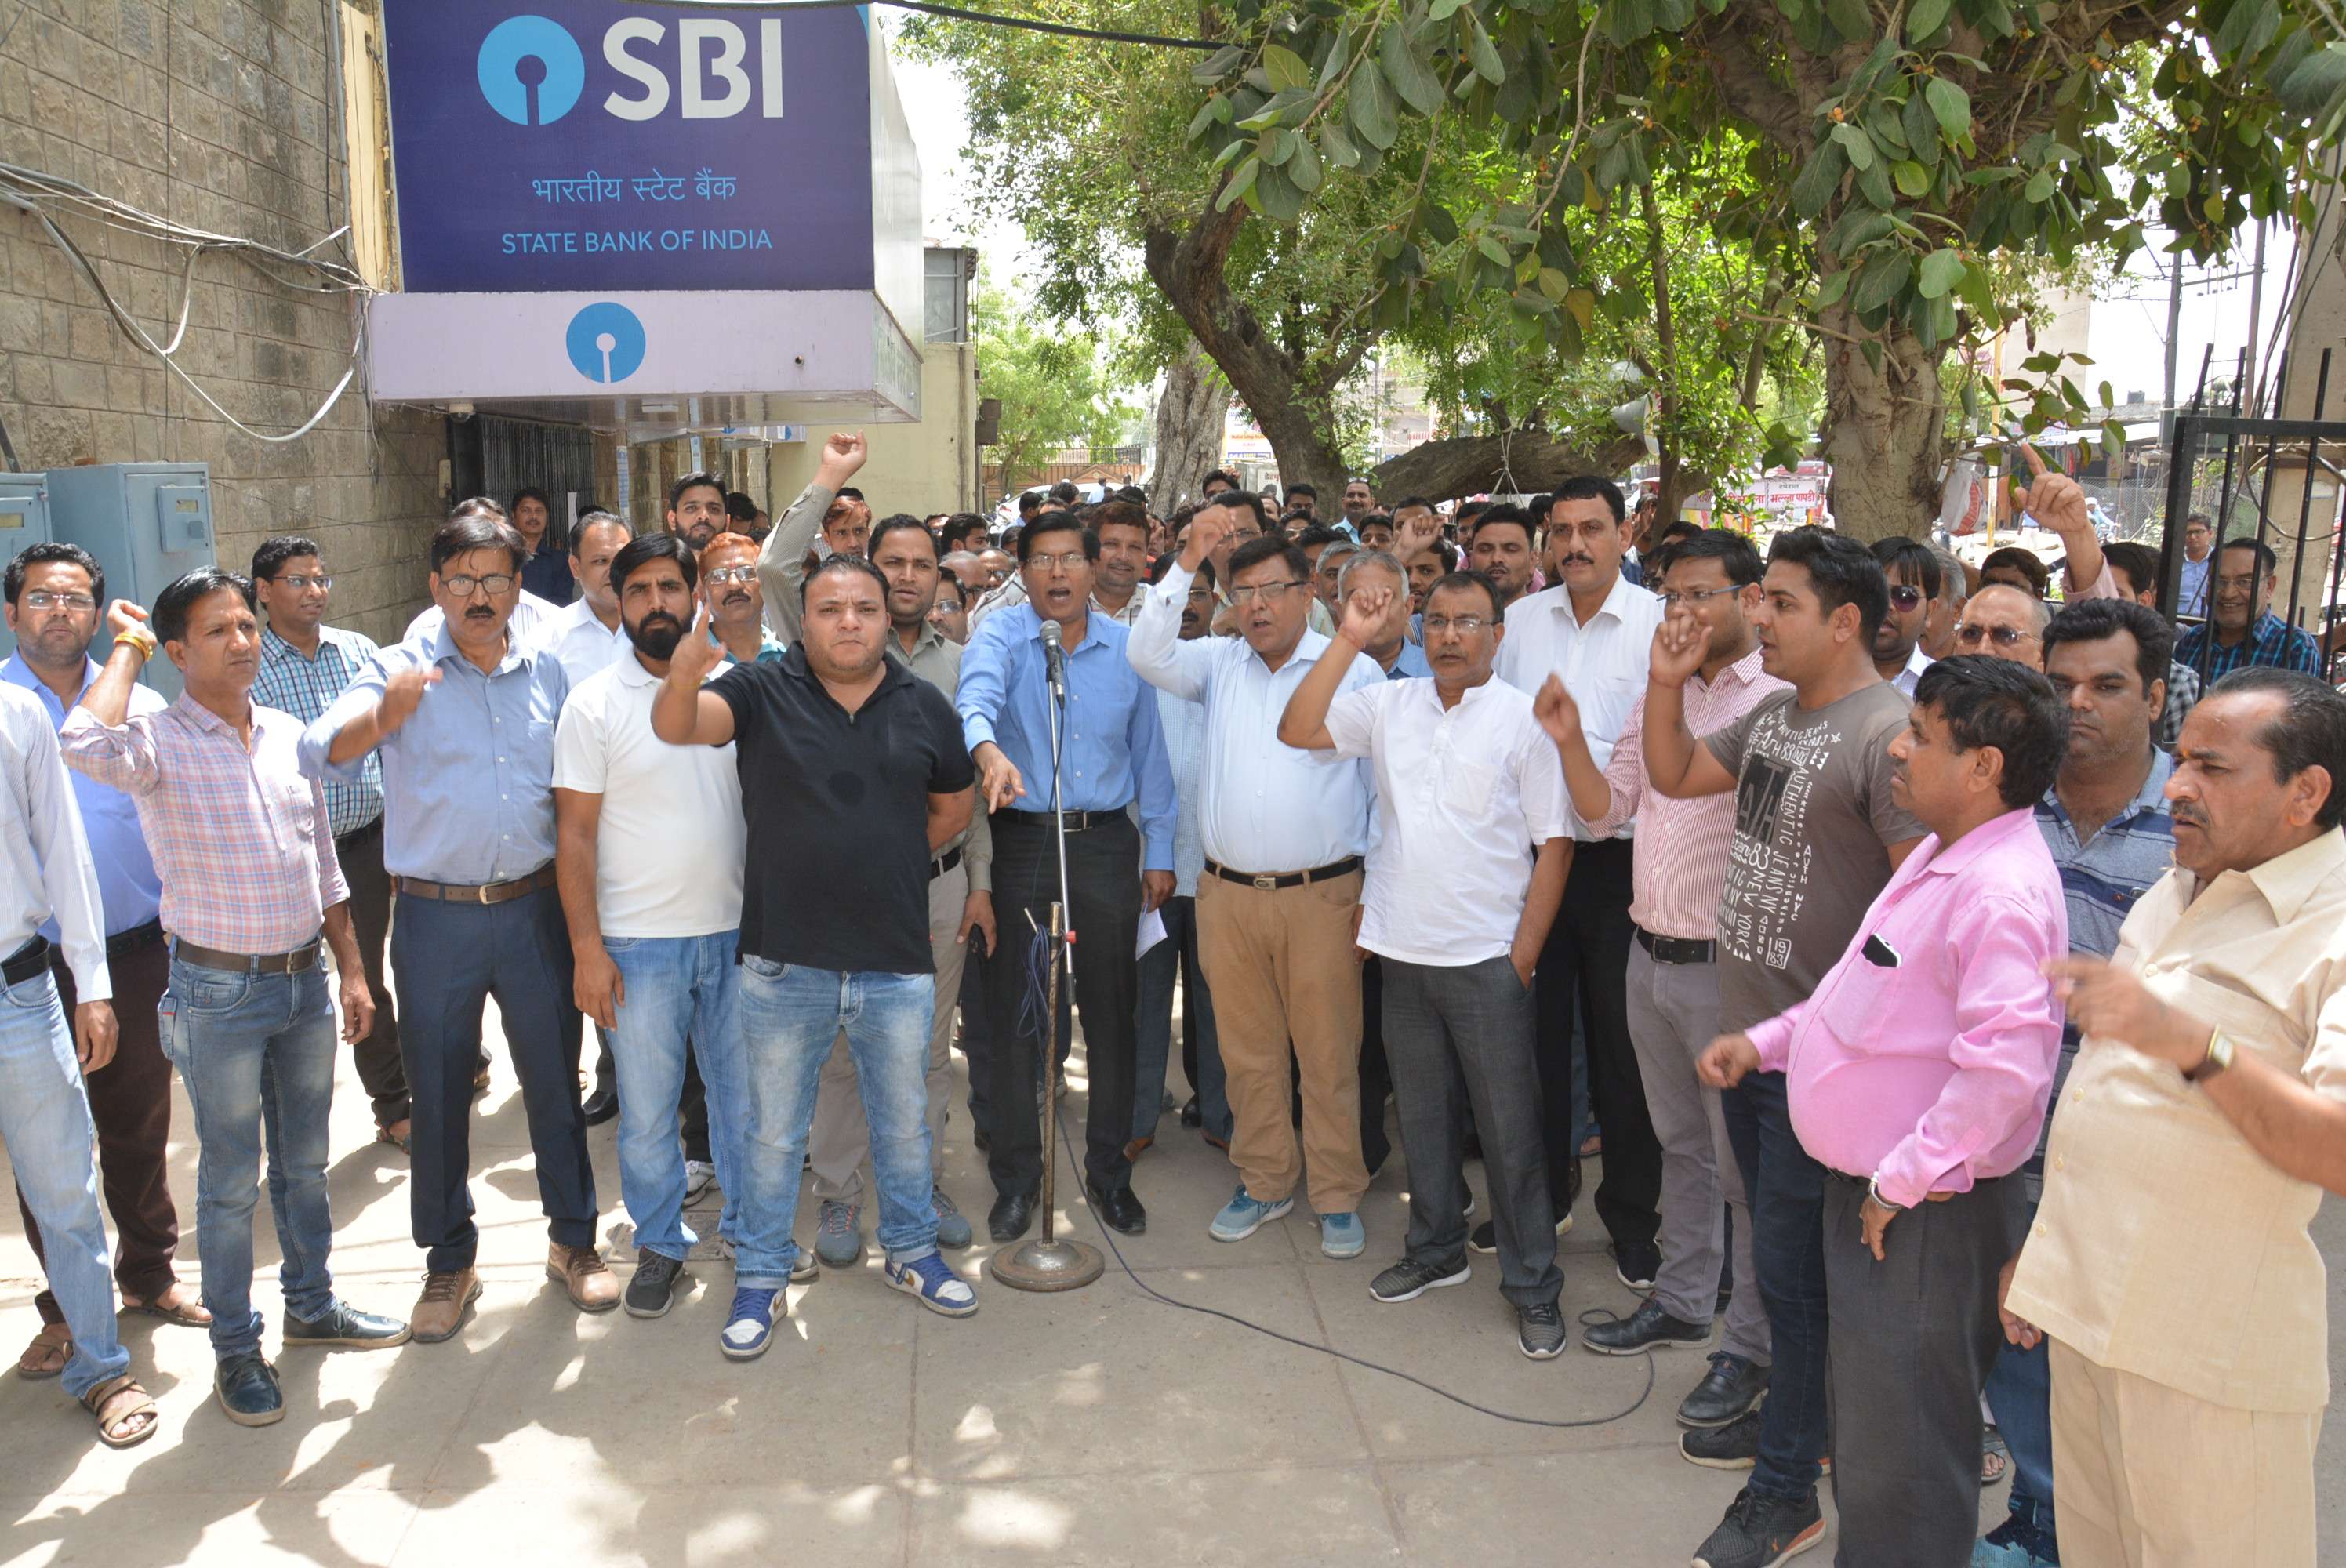 Bank closed in alwar due to strike of bankers, transaction affected